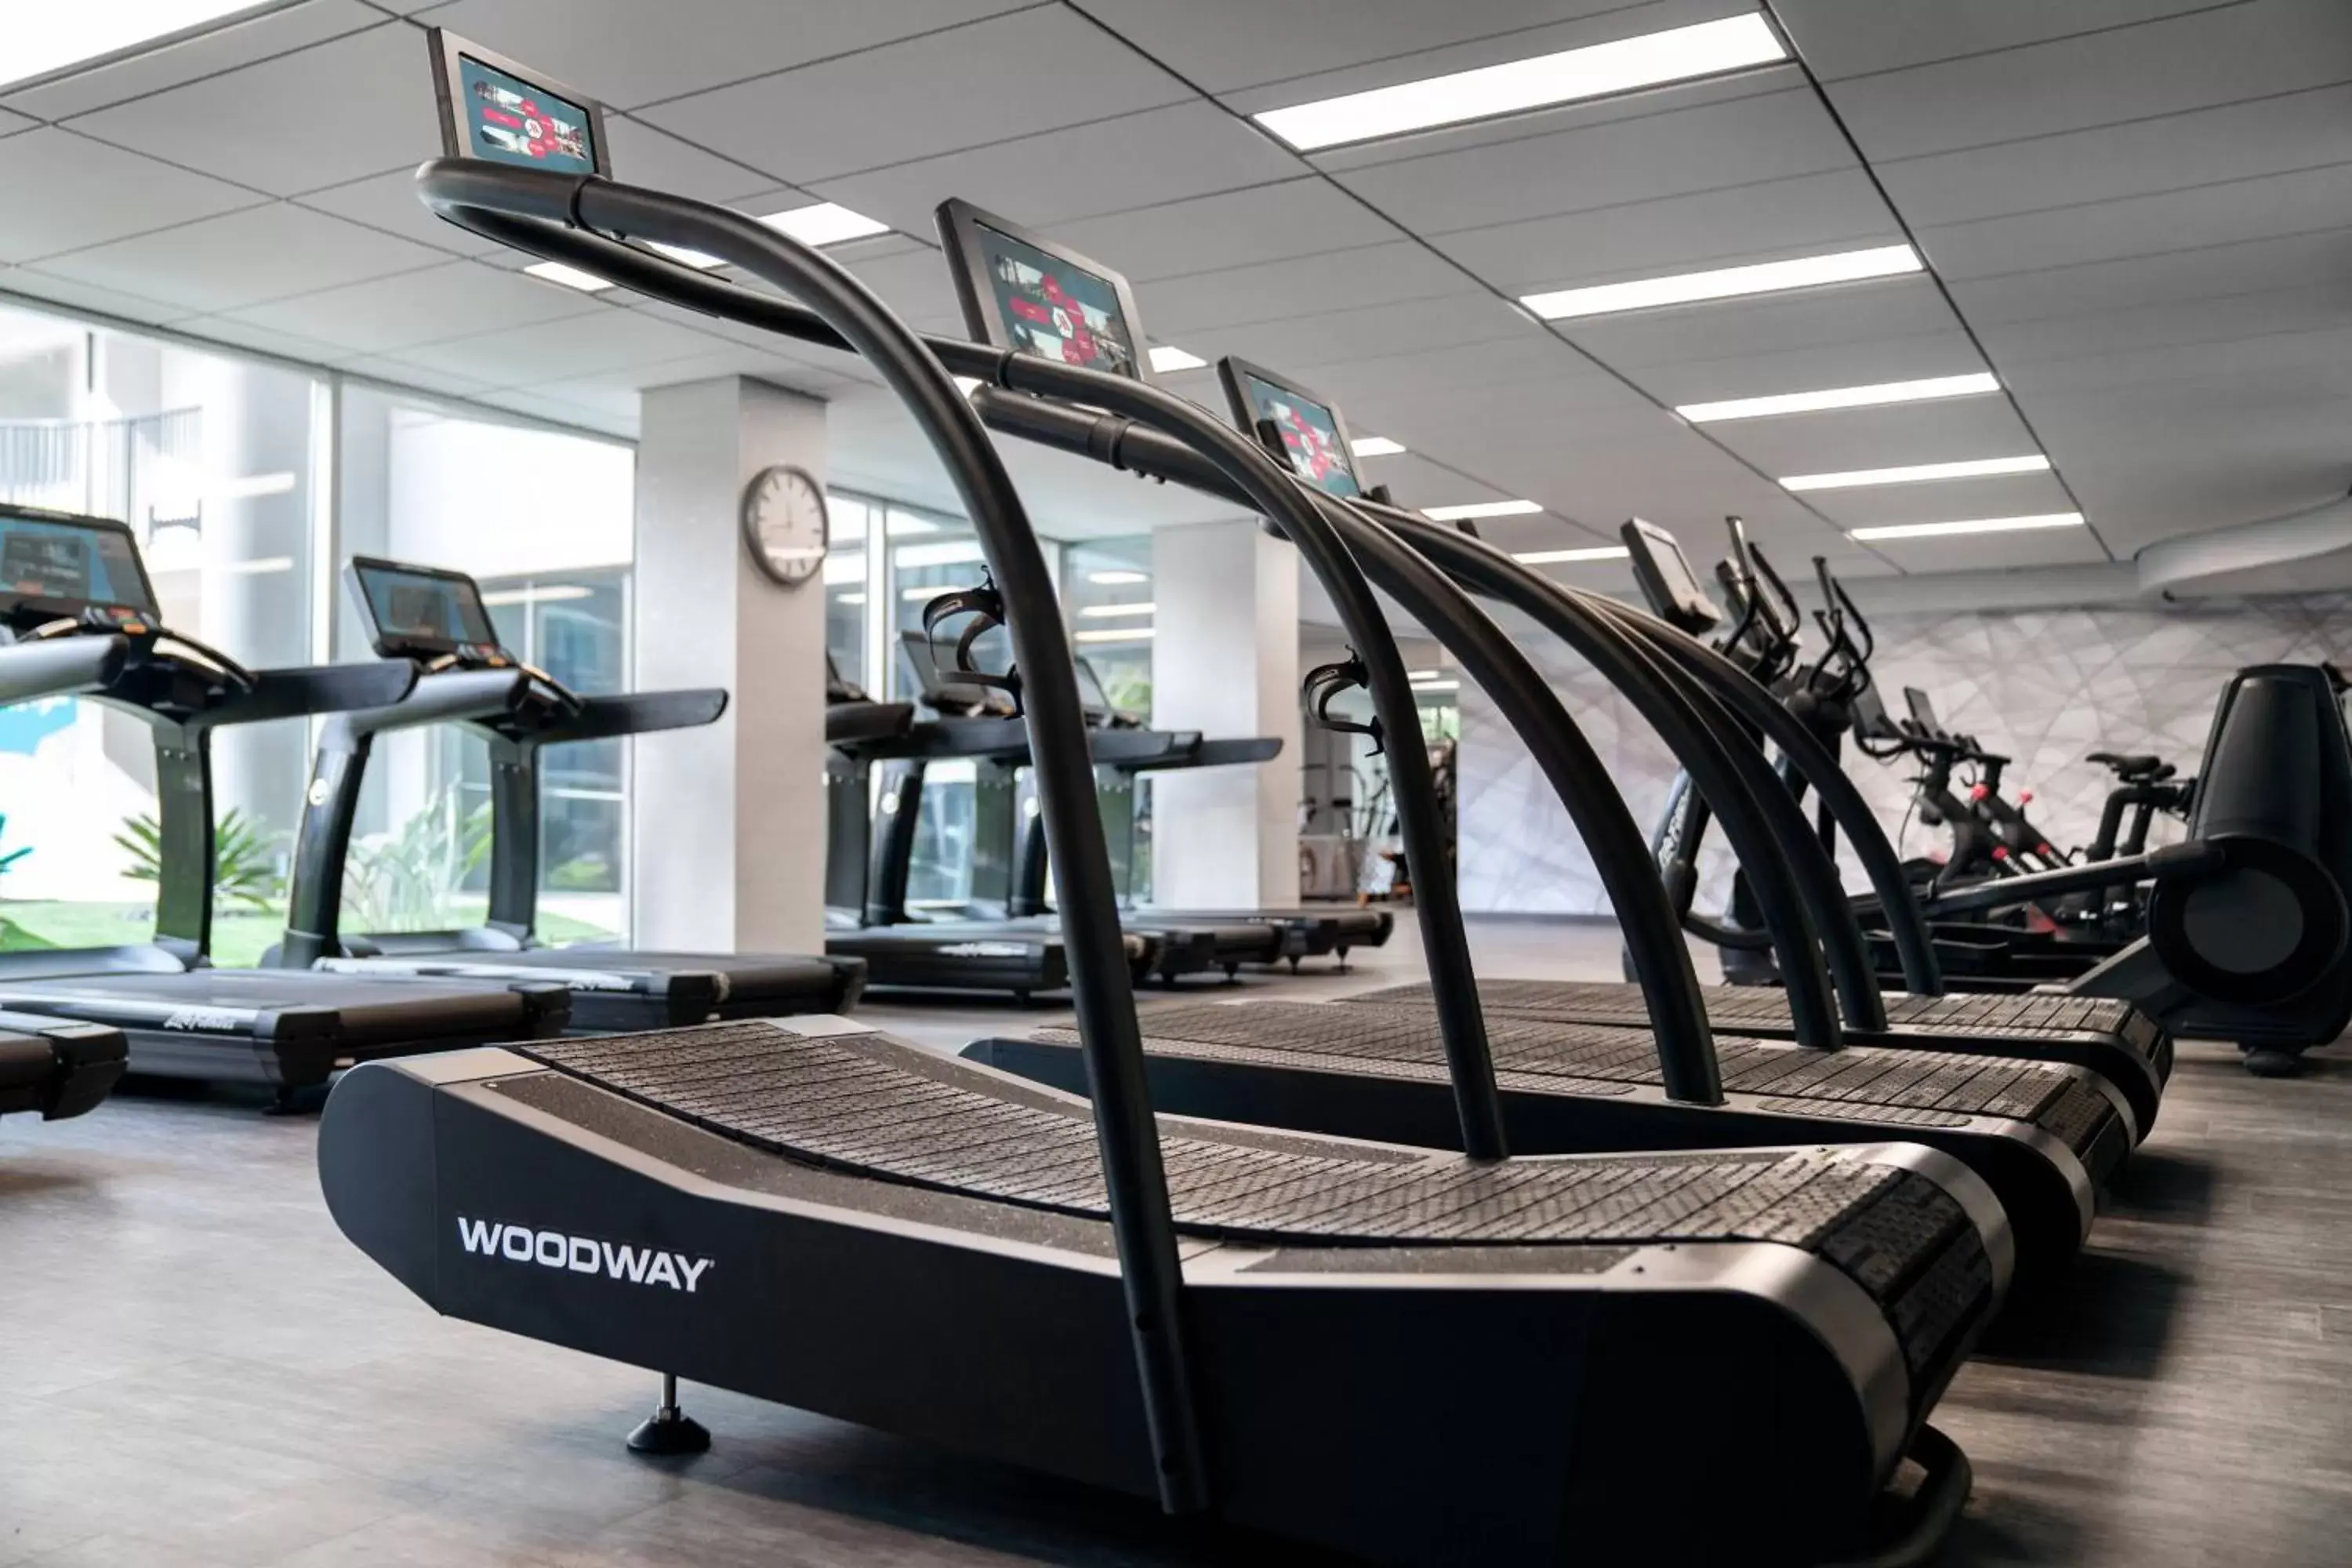 Fitness centre/facilities, Fitness Center/Facilities in Los Angeles Airport Marriott